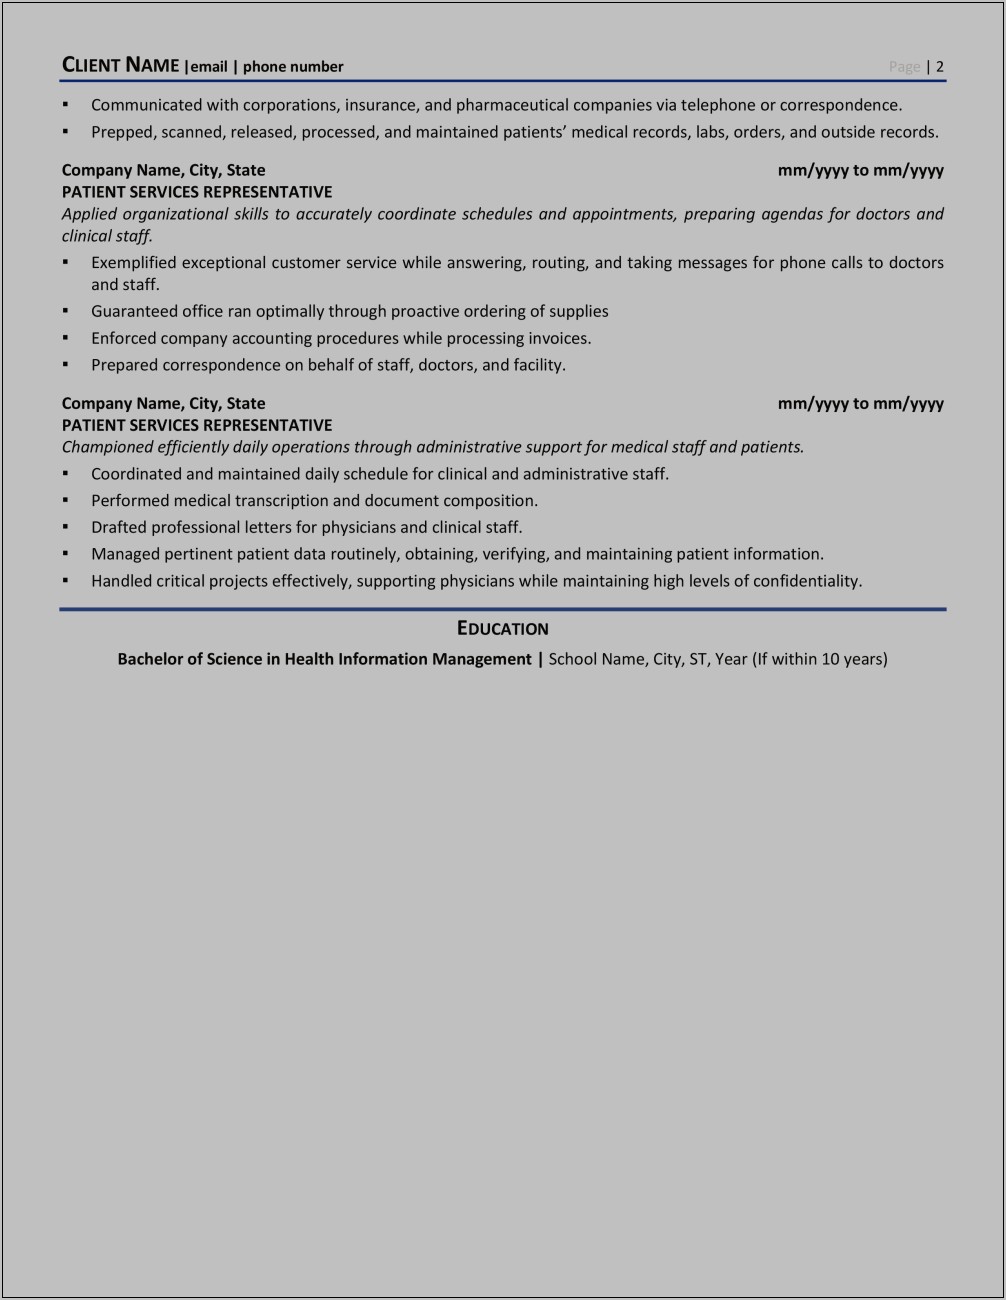 Medical Insurance Specialist Resume Objective Statement